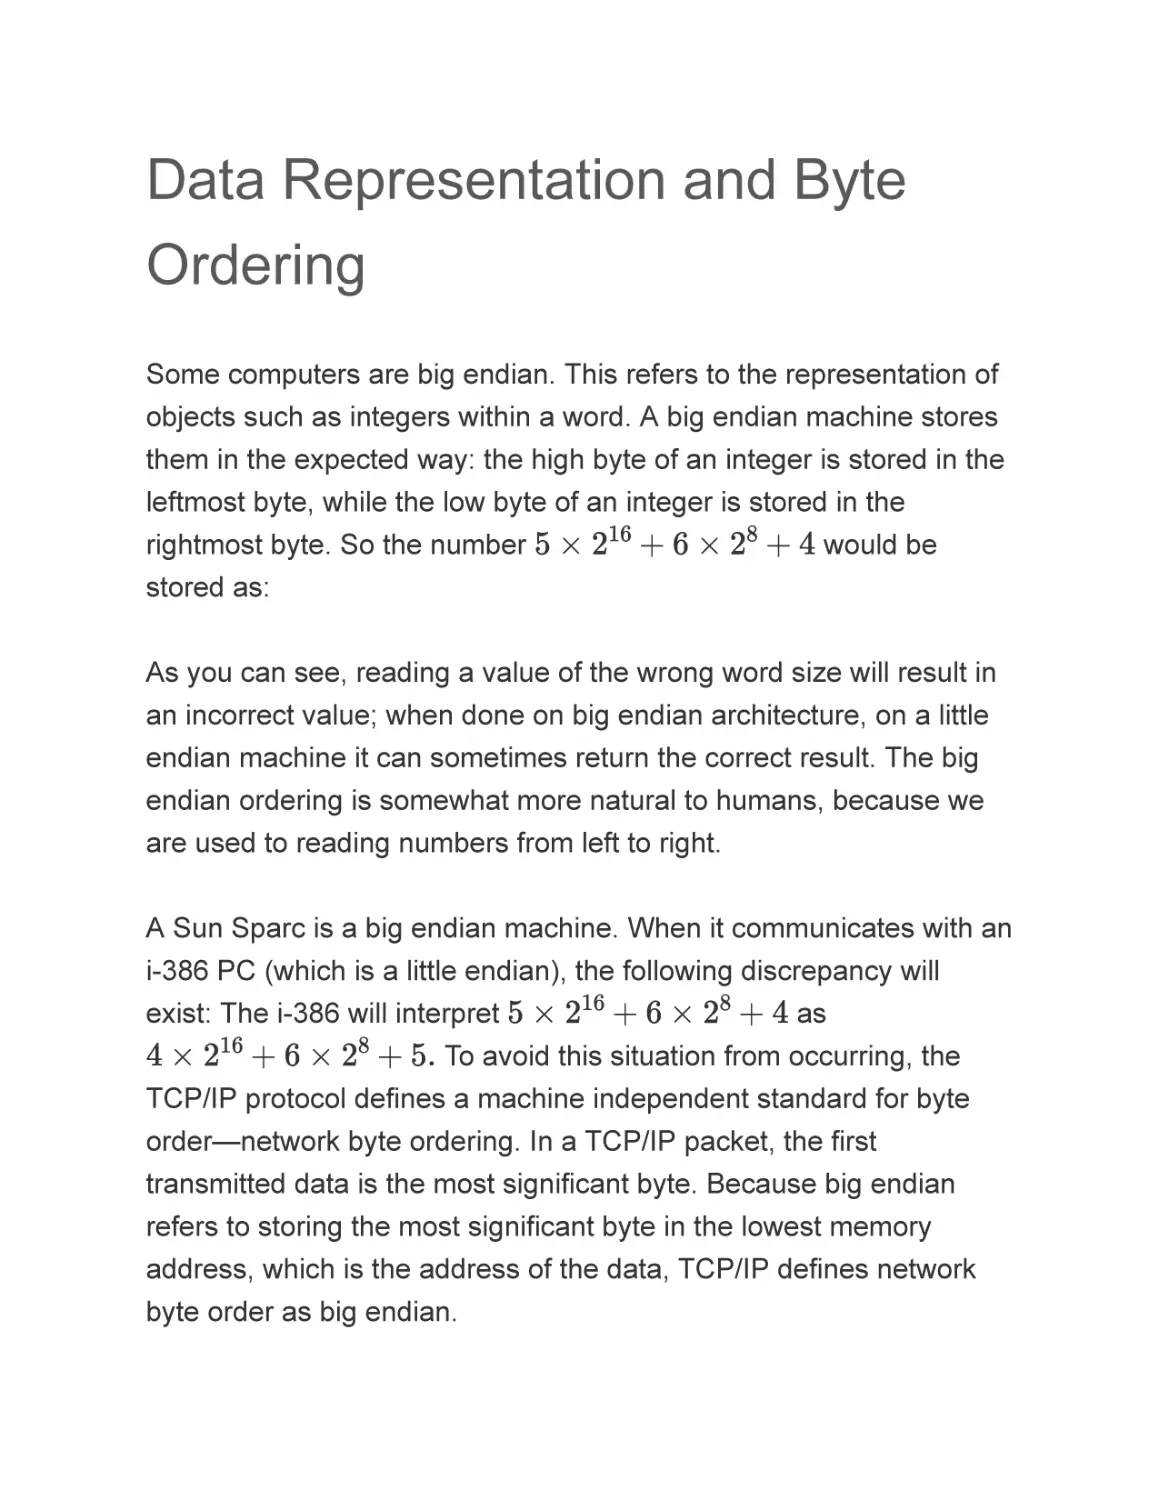 Data Representation and Byte Ordering